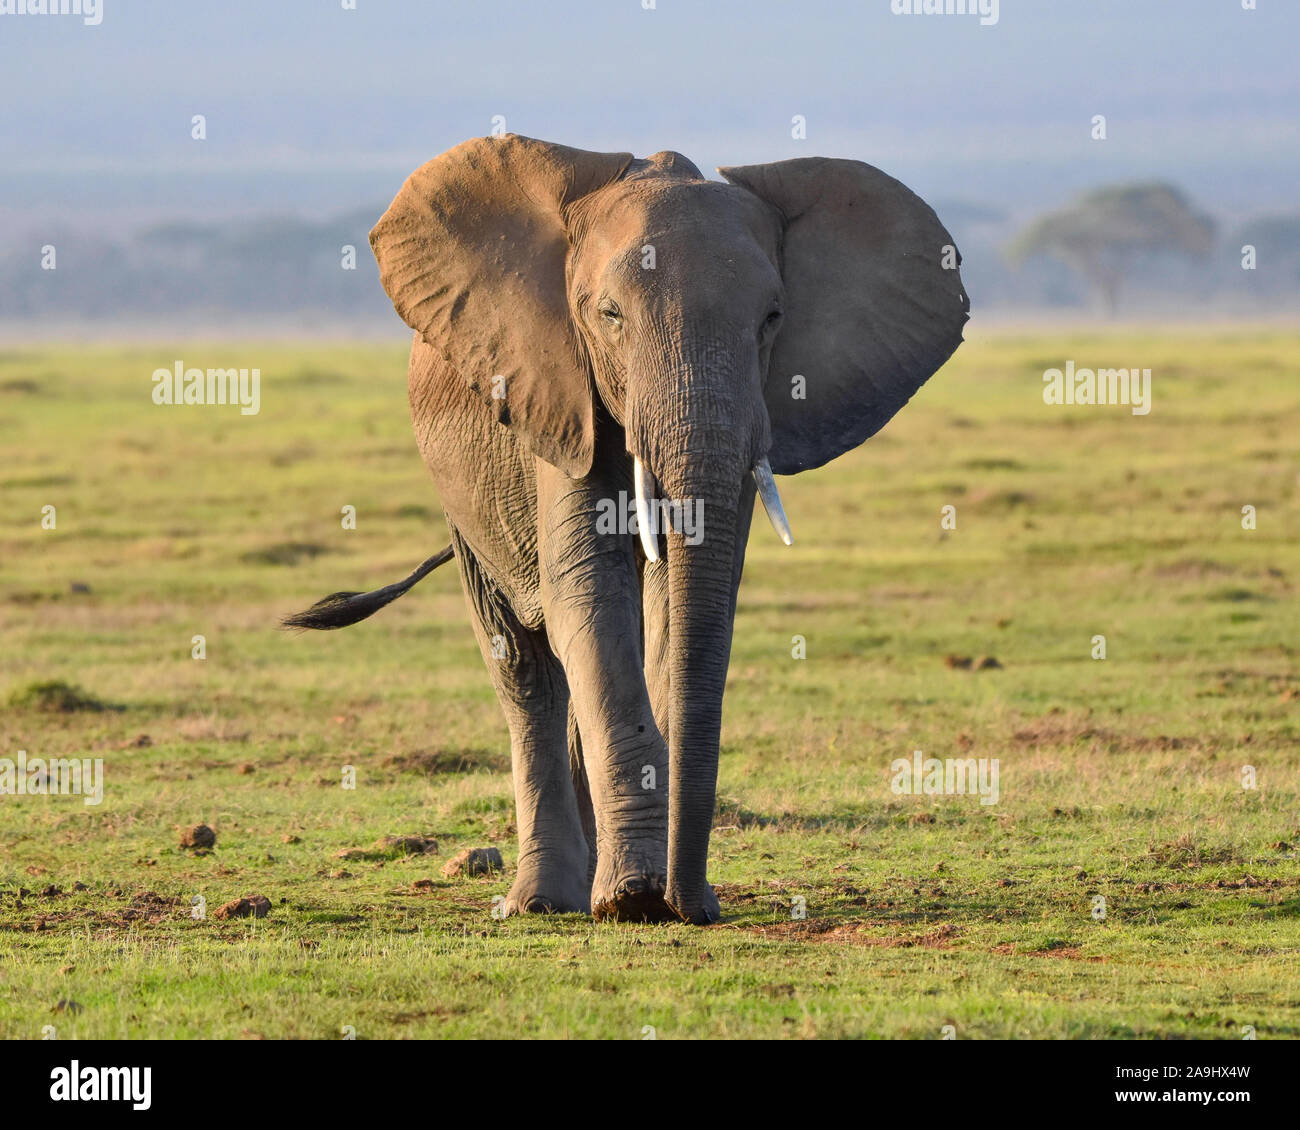 A young female elephant walks softly across a grassland green from rain after a drought. The background is blurred blue. (Loxodonta africana) Stock Photo